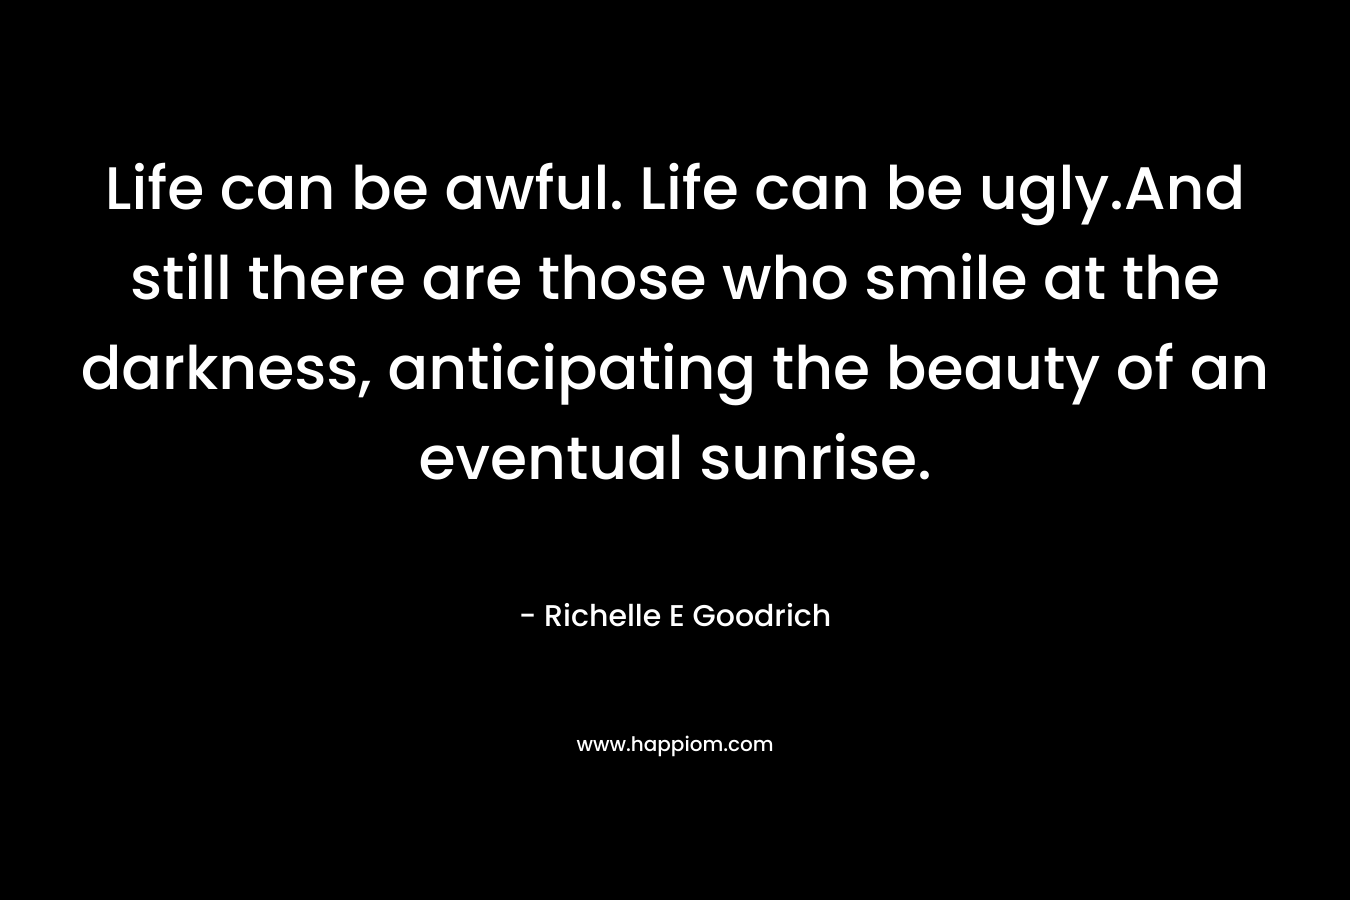 Life can be awful. Life can be ugly.And still there are those who smile at the darkness, anticipating the beauty of an eventual sunrise. – Richelle E Goodrich